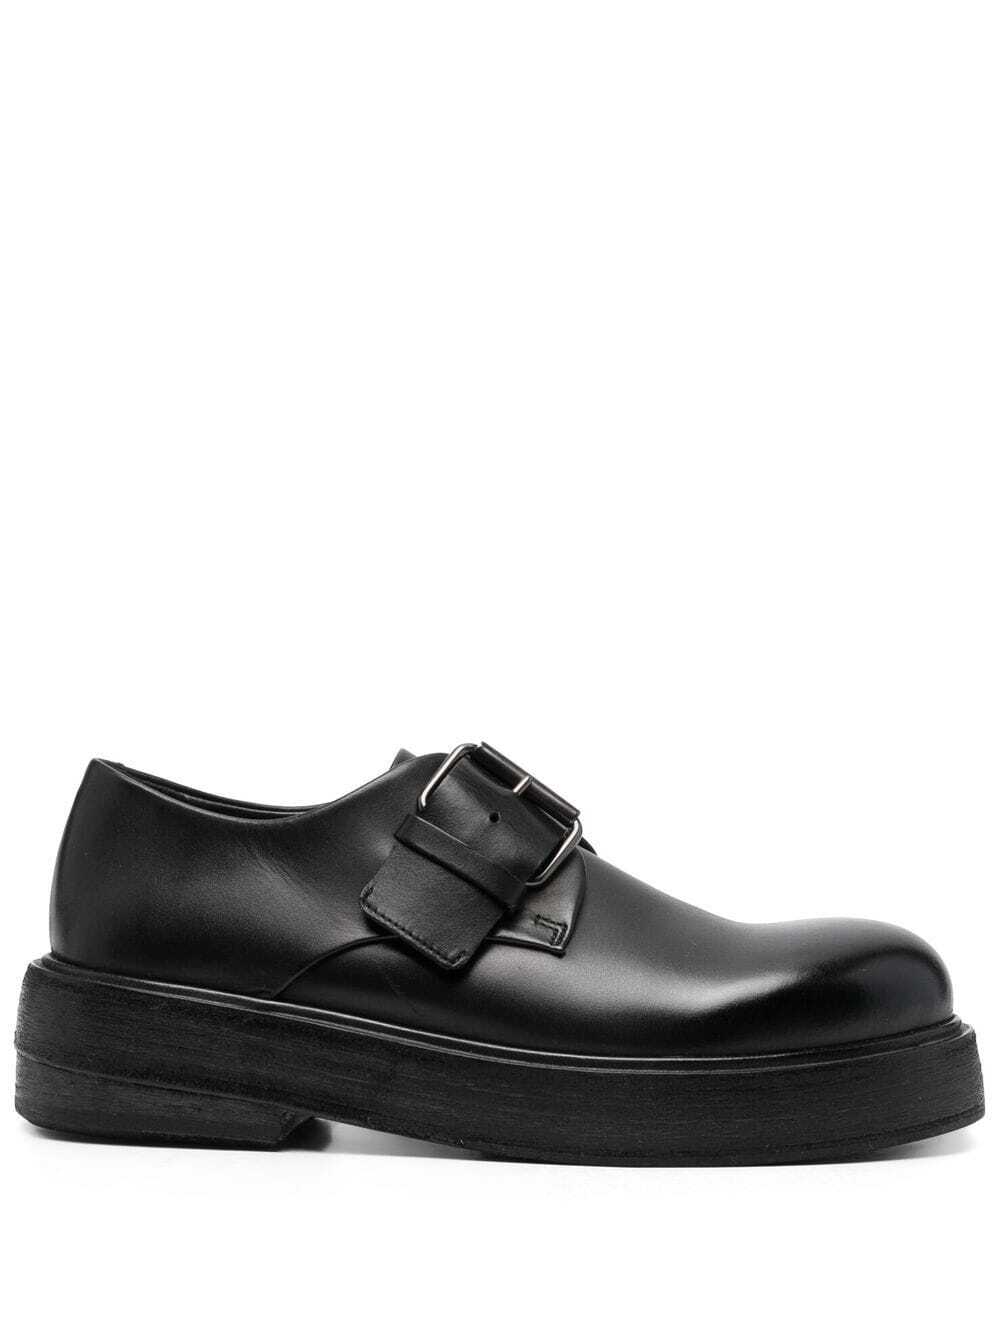 Marsèll buckle-fastened oxford shoes - Black